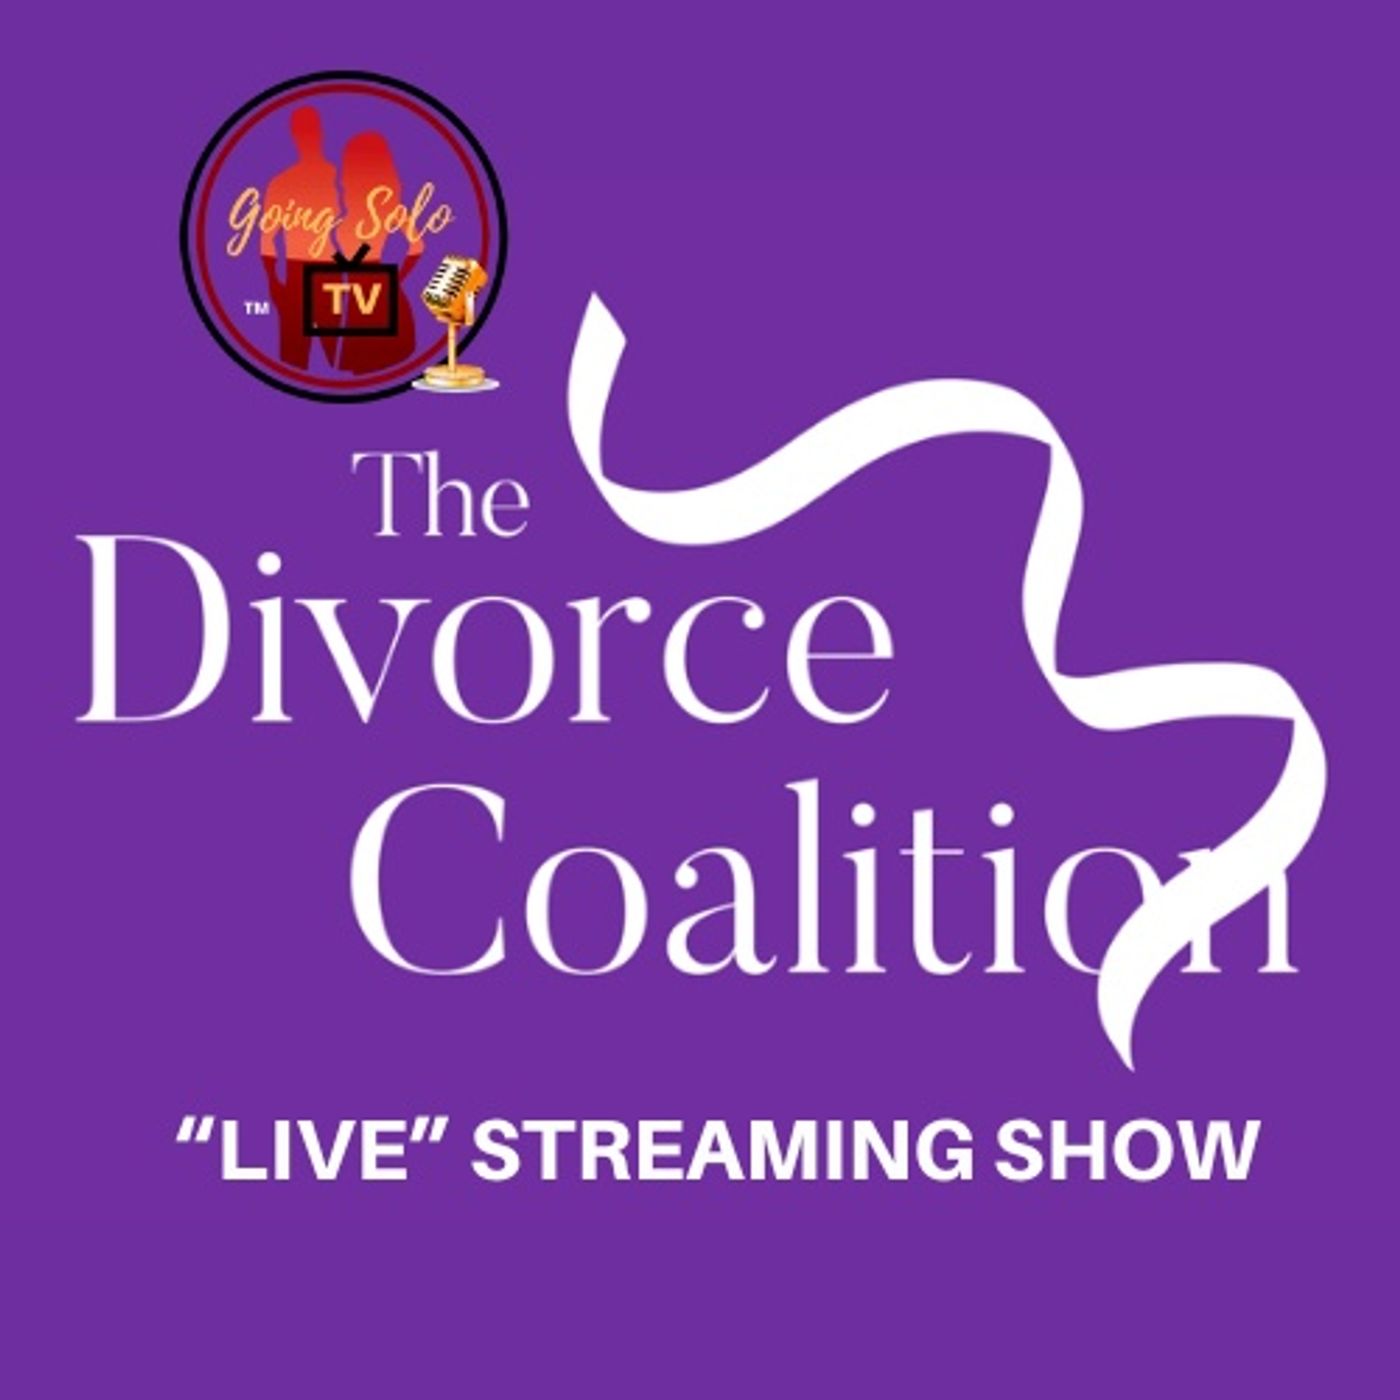 Divorce Coalition Live:WGSN-DB Going Solo Network